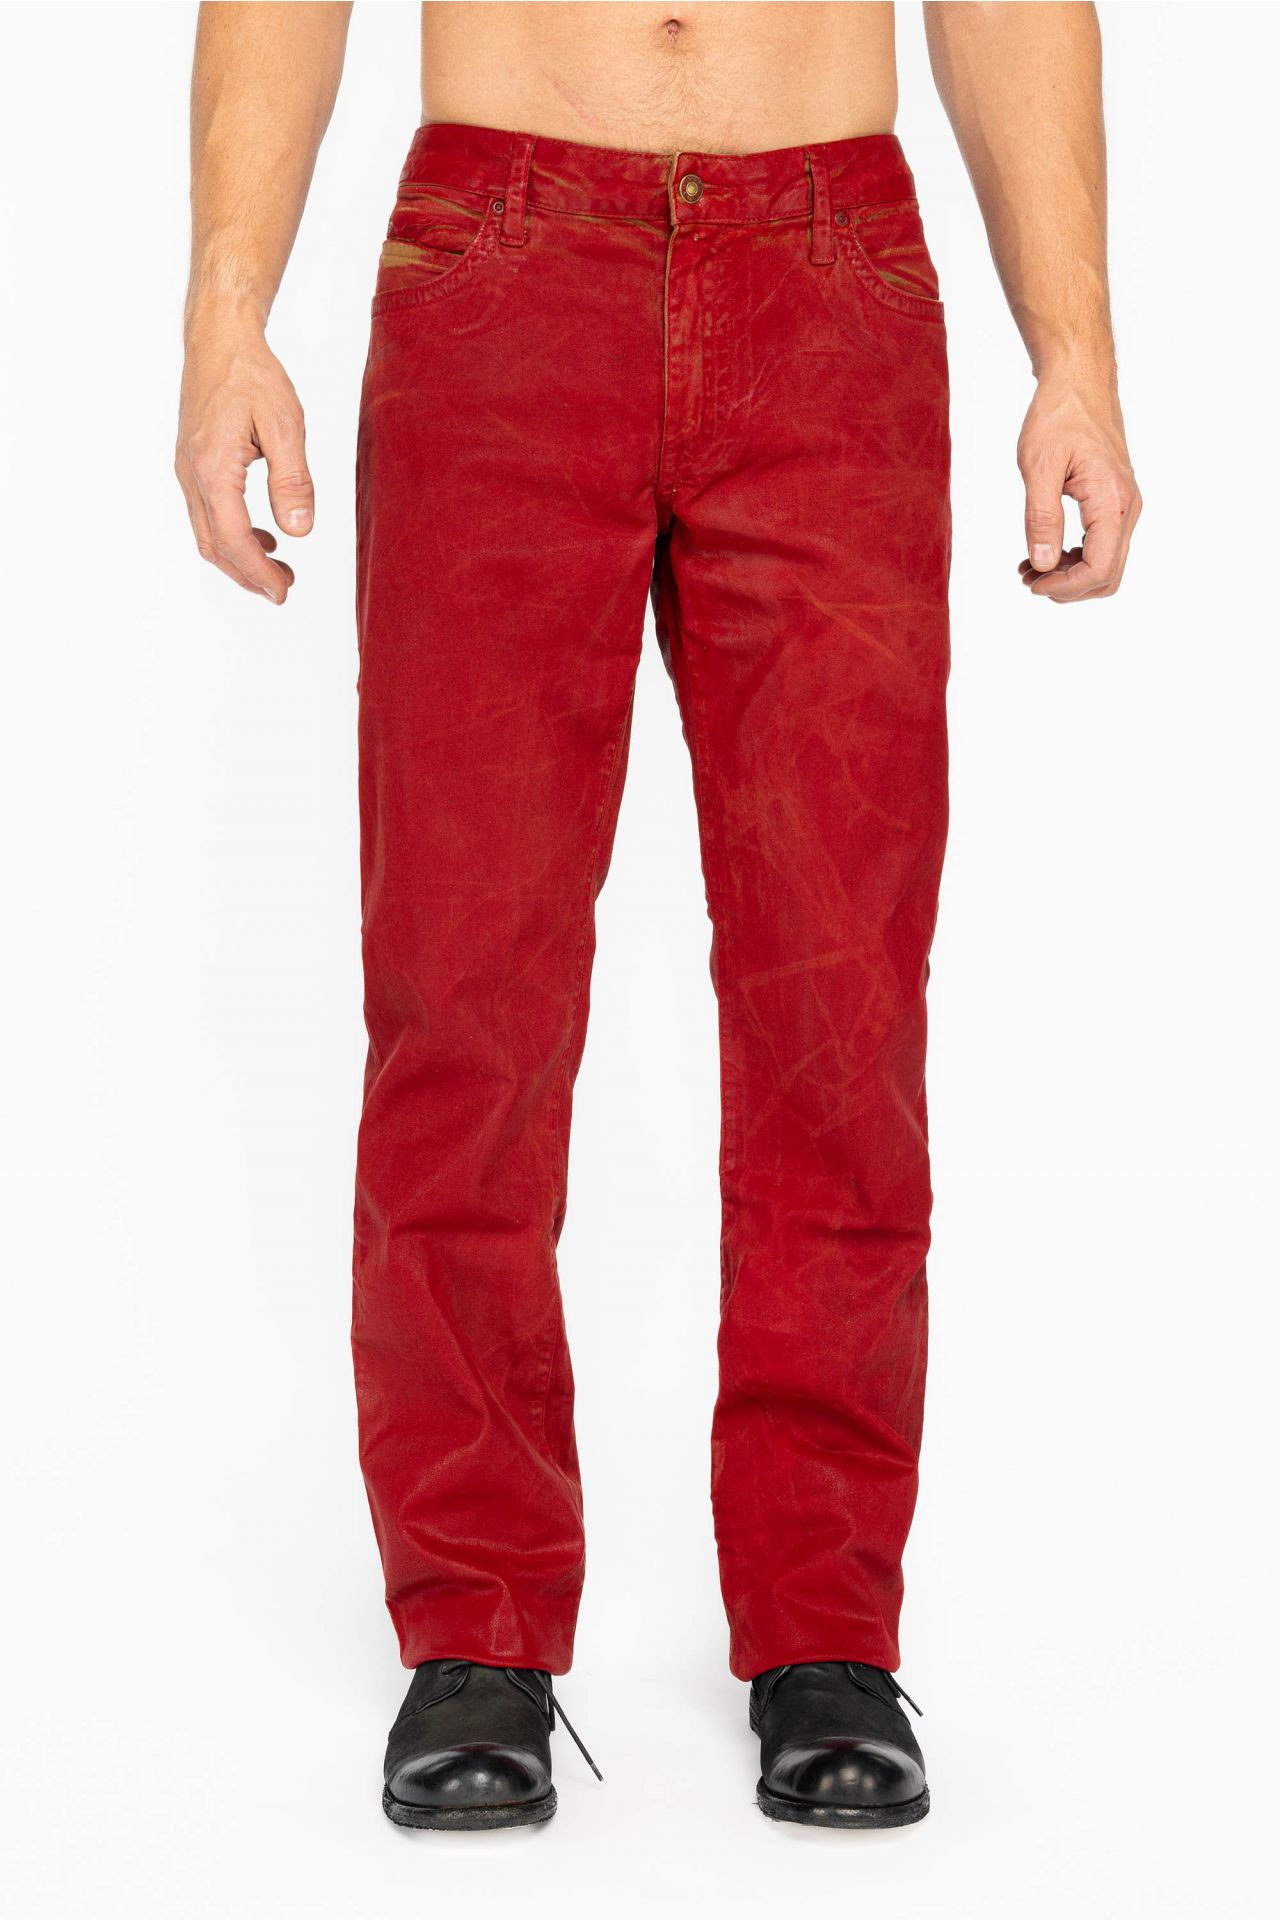 CLASSIC 5 POCKET STRAIGHT LEG JEANS IN CUIR DOUBLE RED